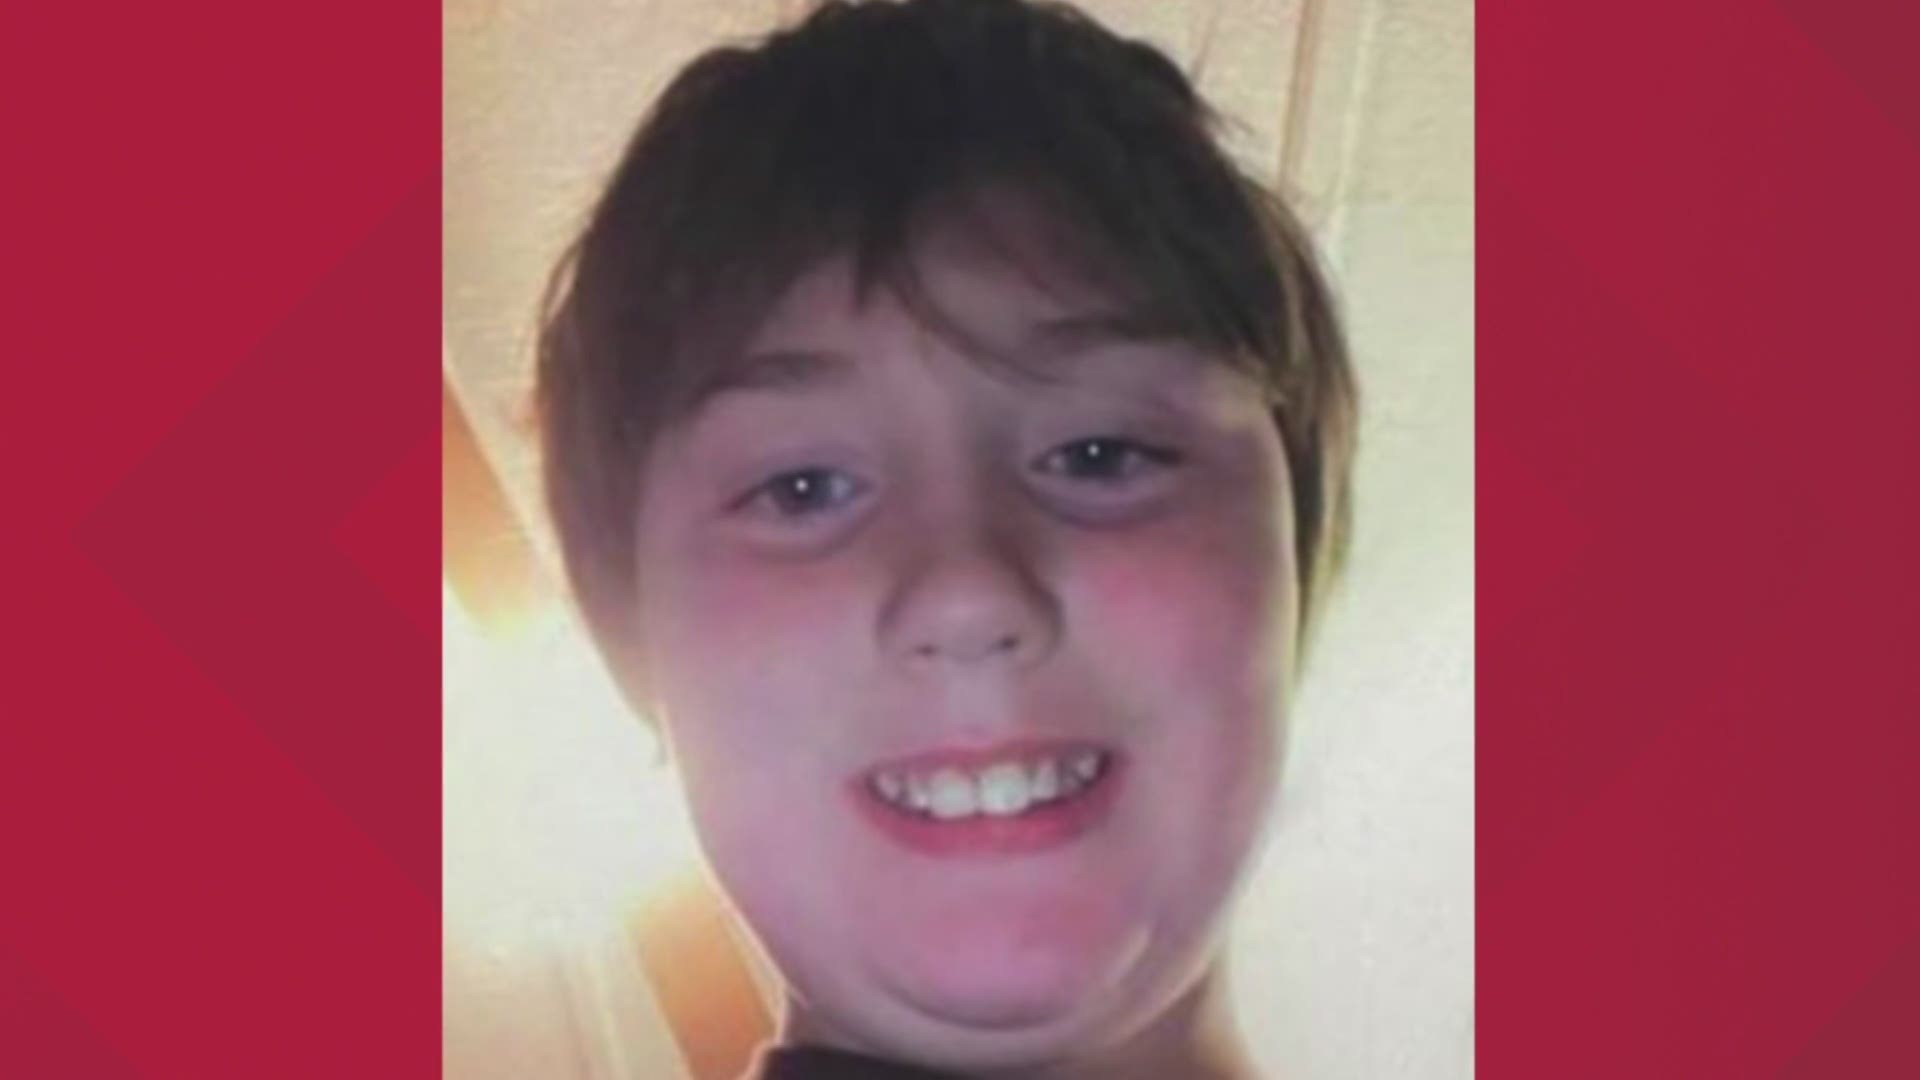 Videos and pictures can be uploaded to the site in an effort to find 11-year-old Xavior Harrelson of Montezuma.